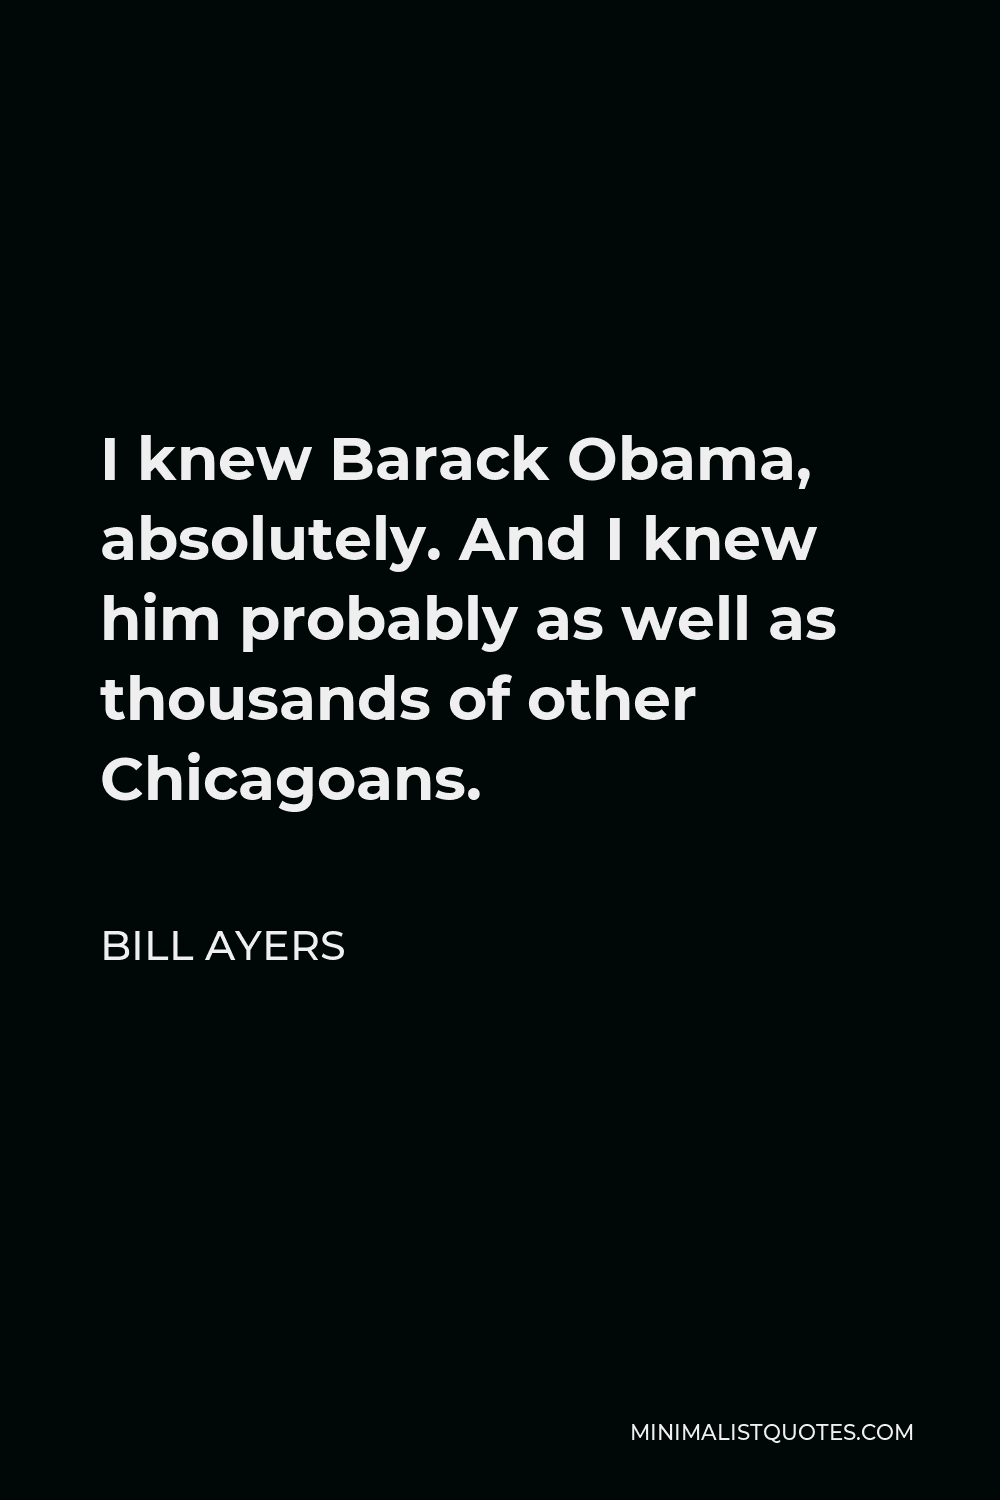 Bill Ayers Quote - I knew Barack Obama, absolutely. And I knew him probably as well as thousands of other Chicagoans.